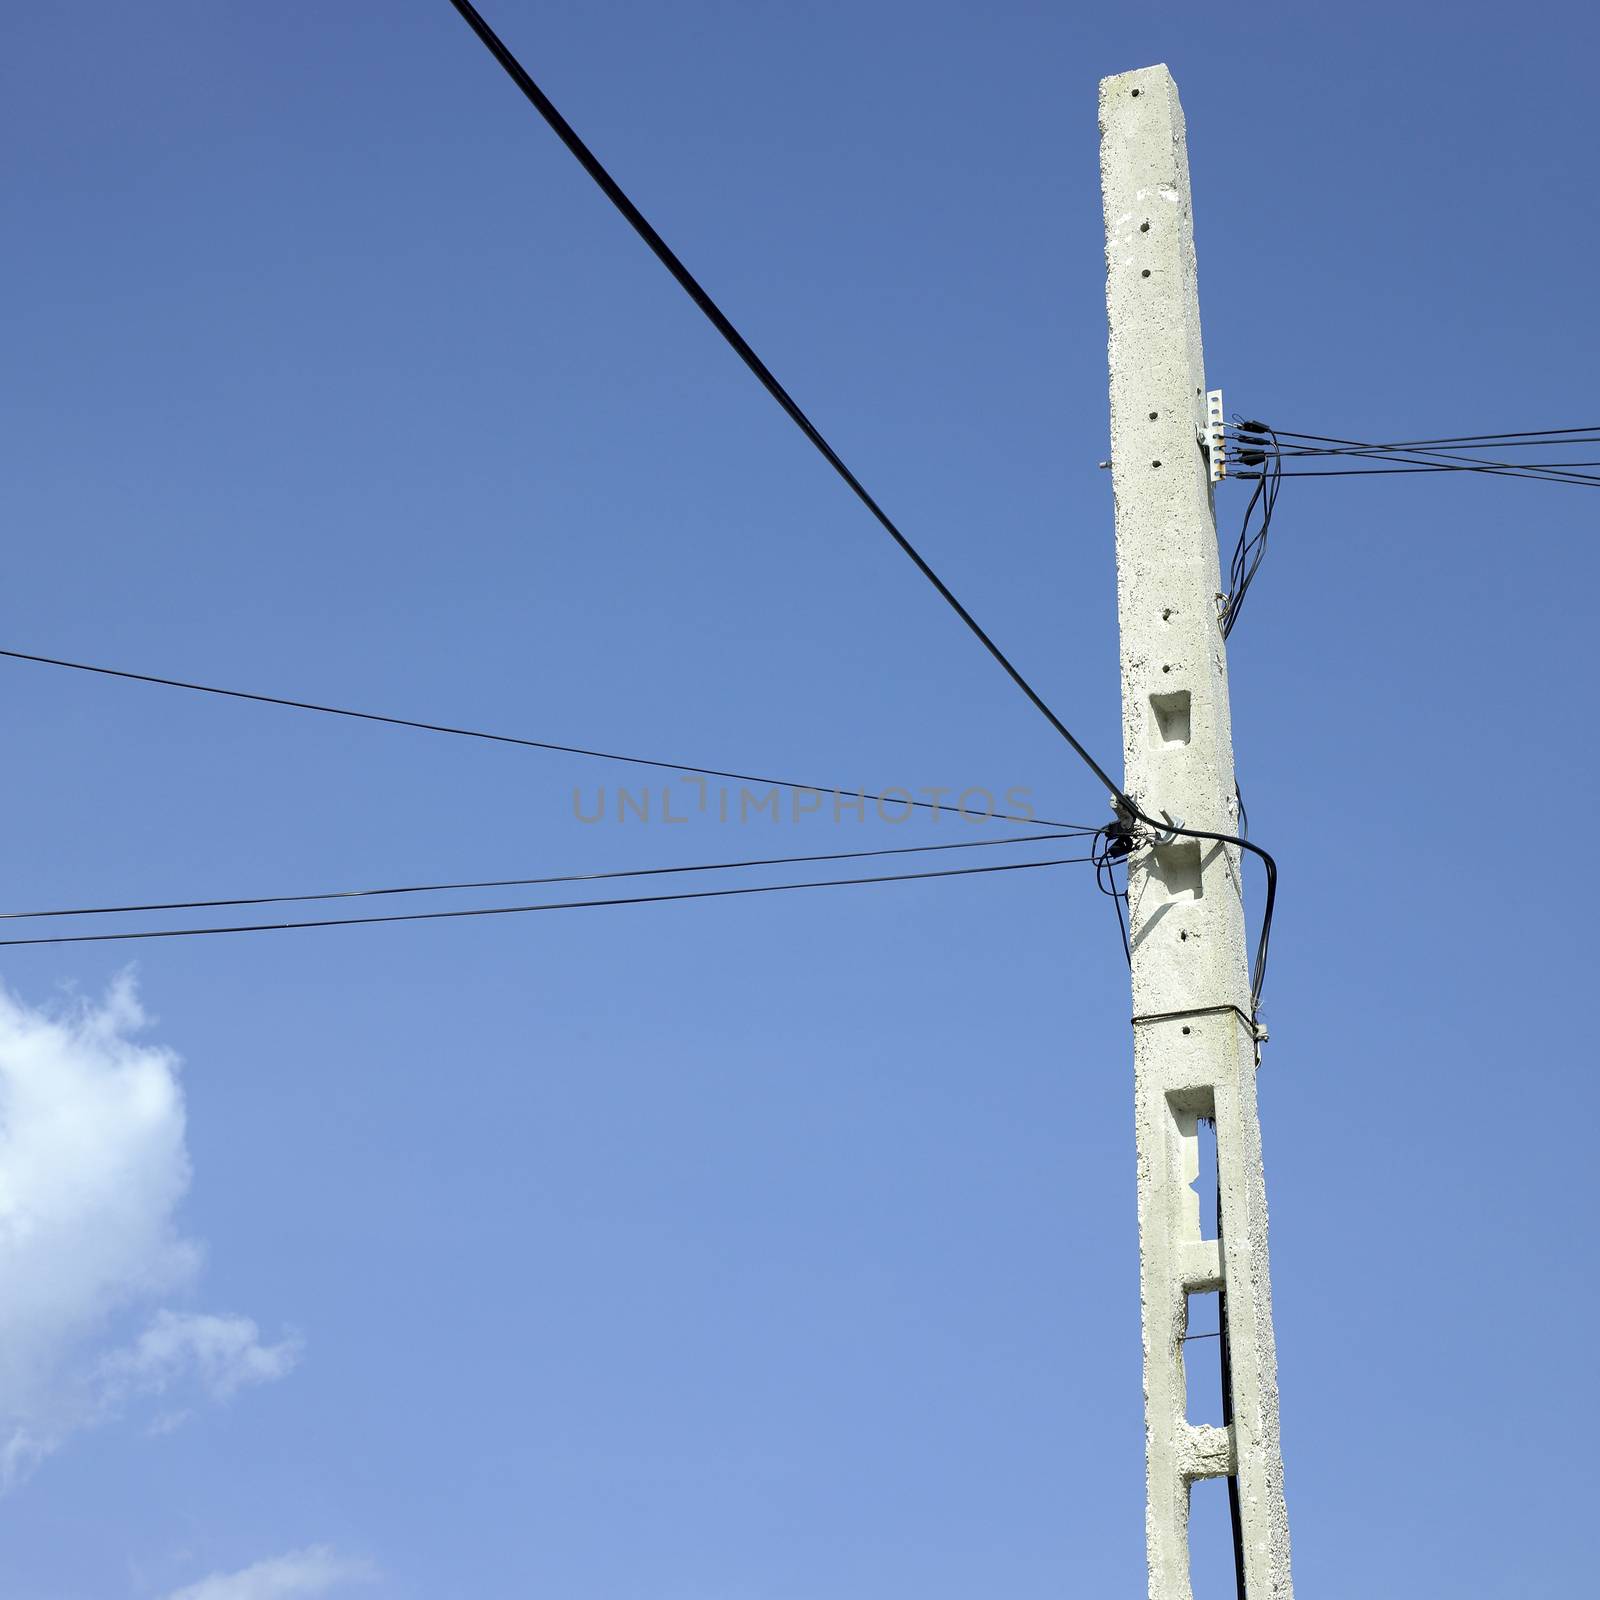 Concrete Electrical Pole  by mmm